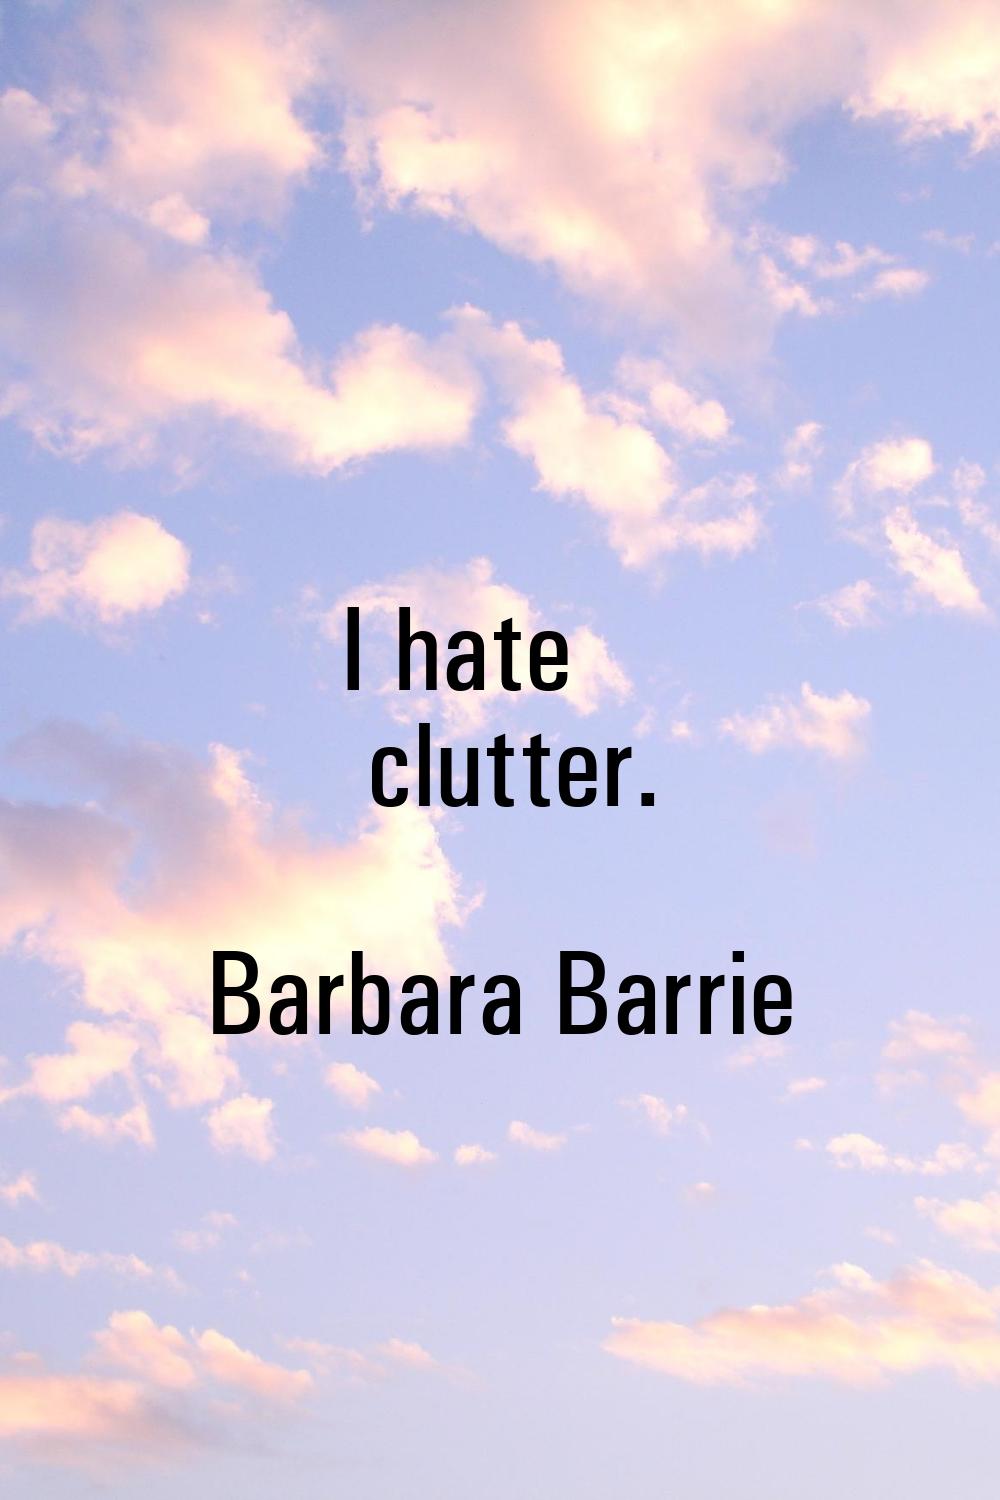 I hate clutter.